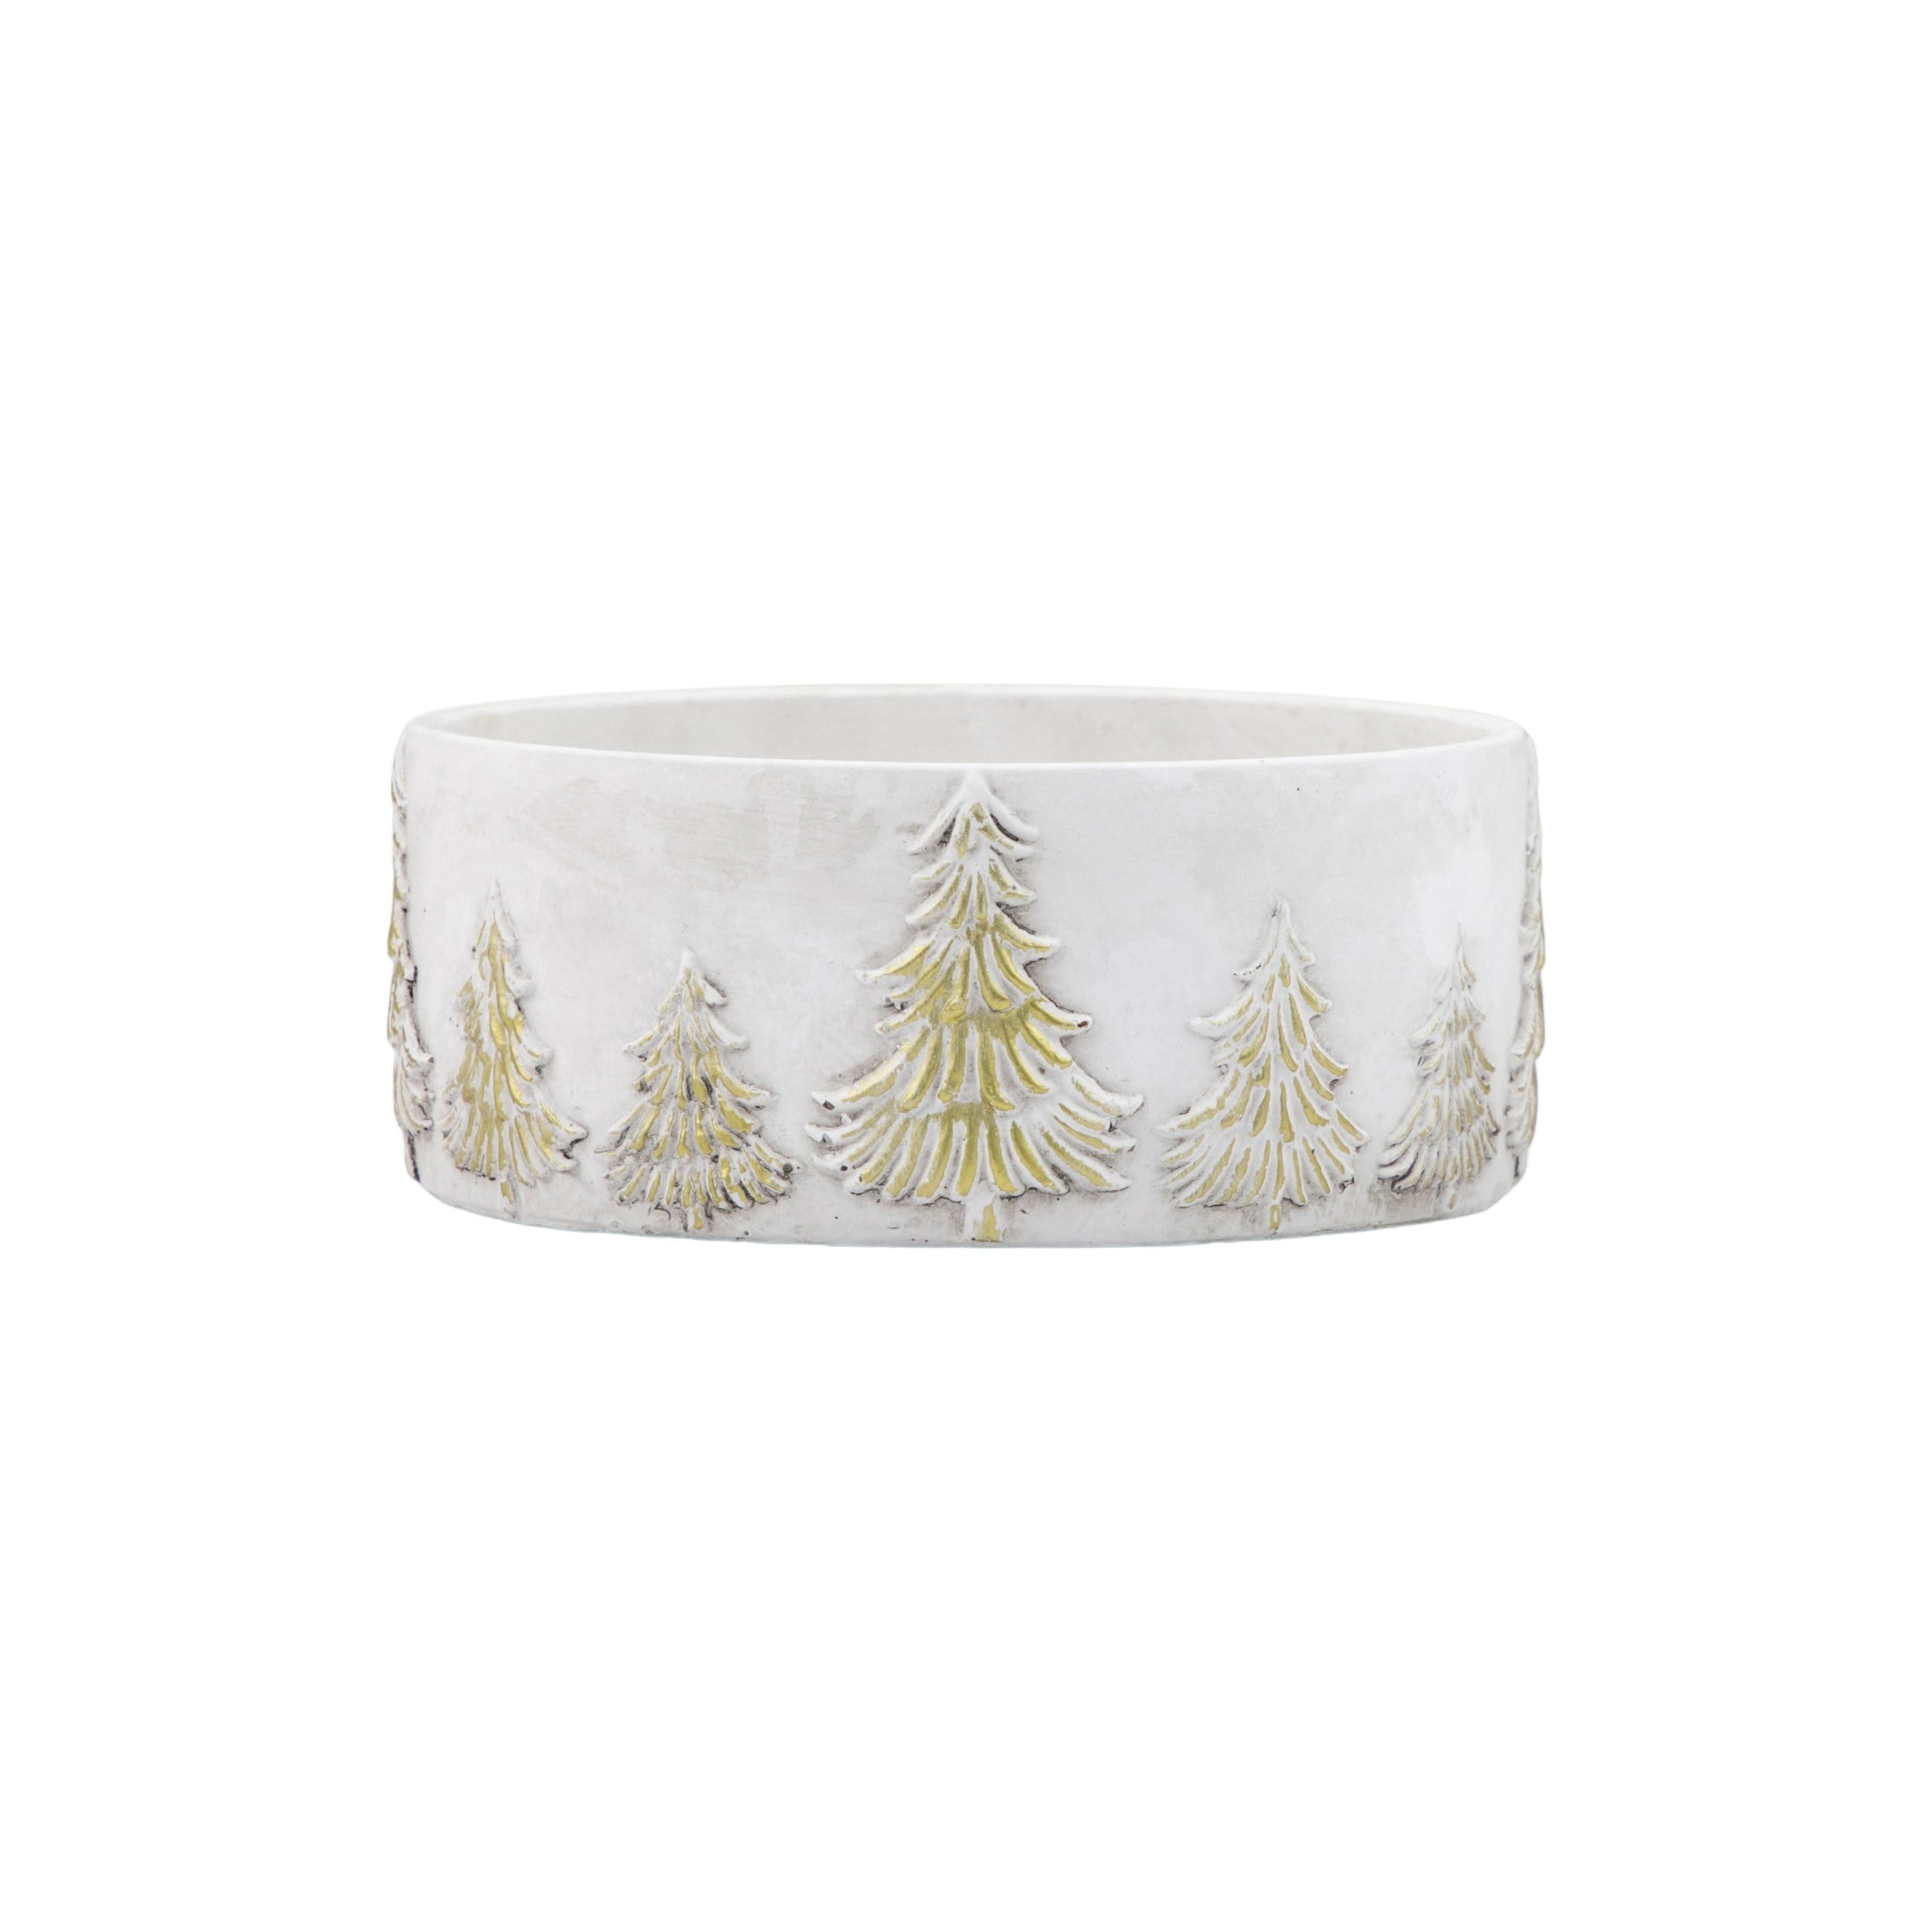 Gallery Direct Forest Planter White & Gold